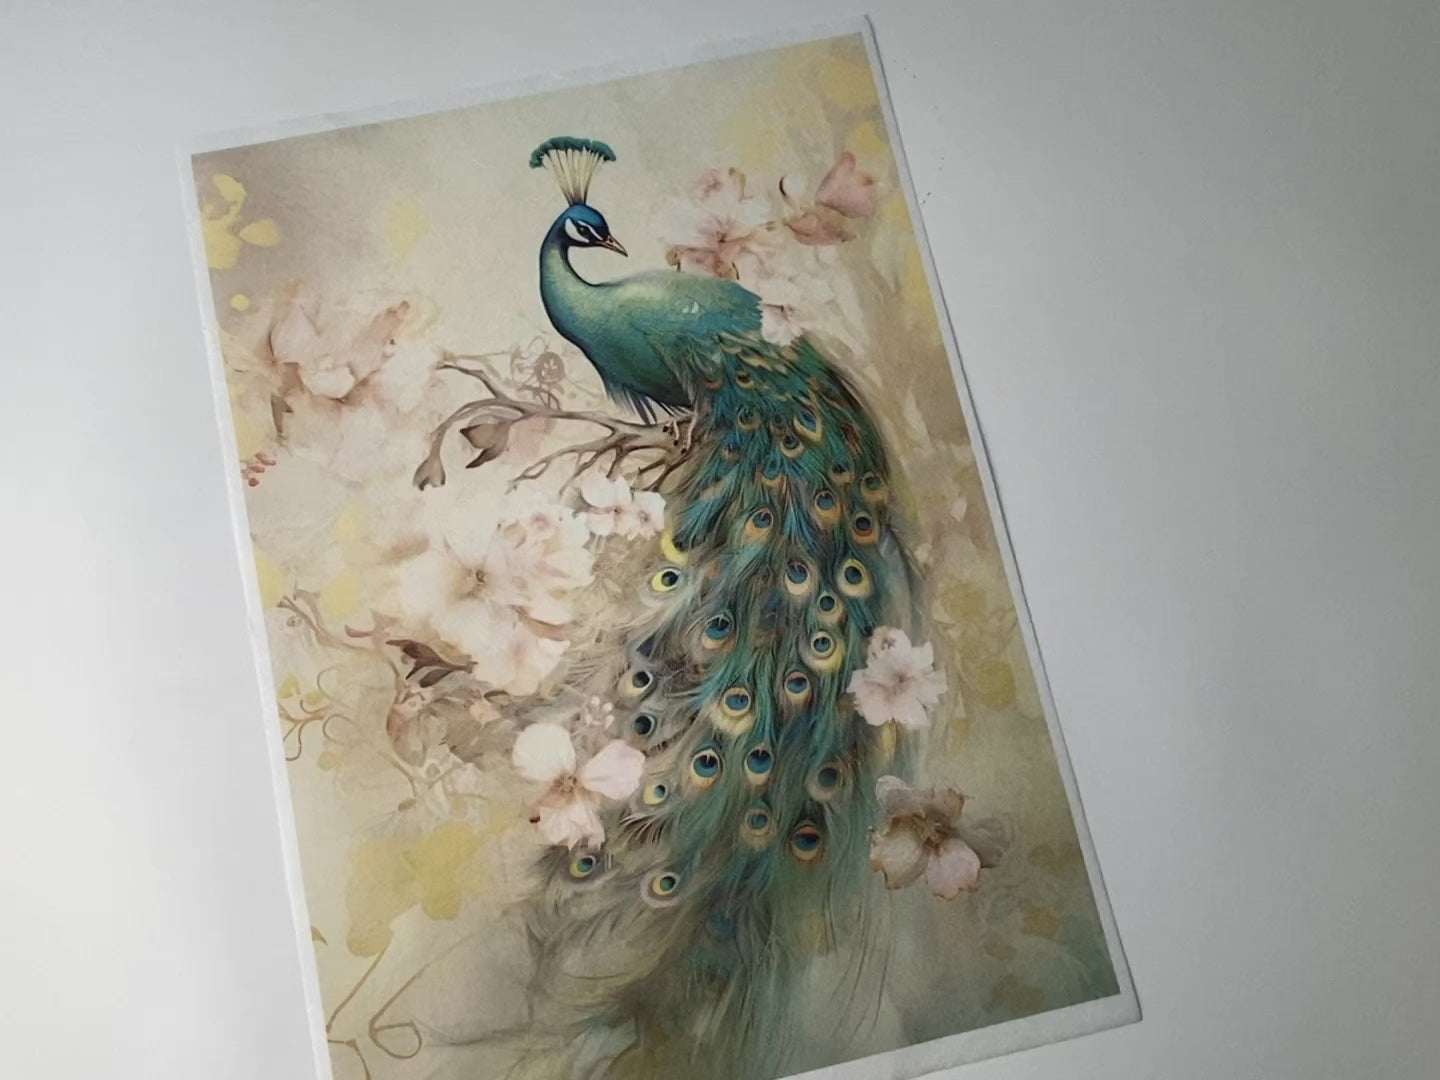 An 11 second video of a hand holding and lifting Decoupage Queen's Dreamscape Peacock A4 Plus rice sheet is against a white background.